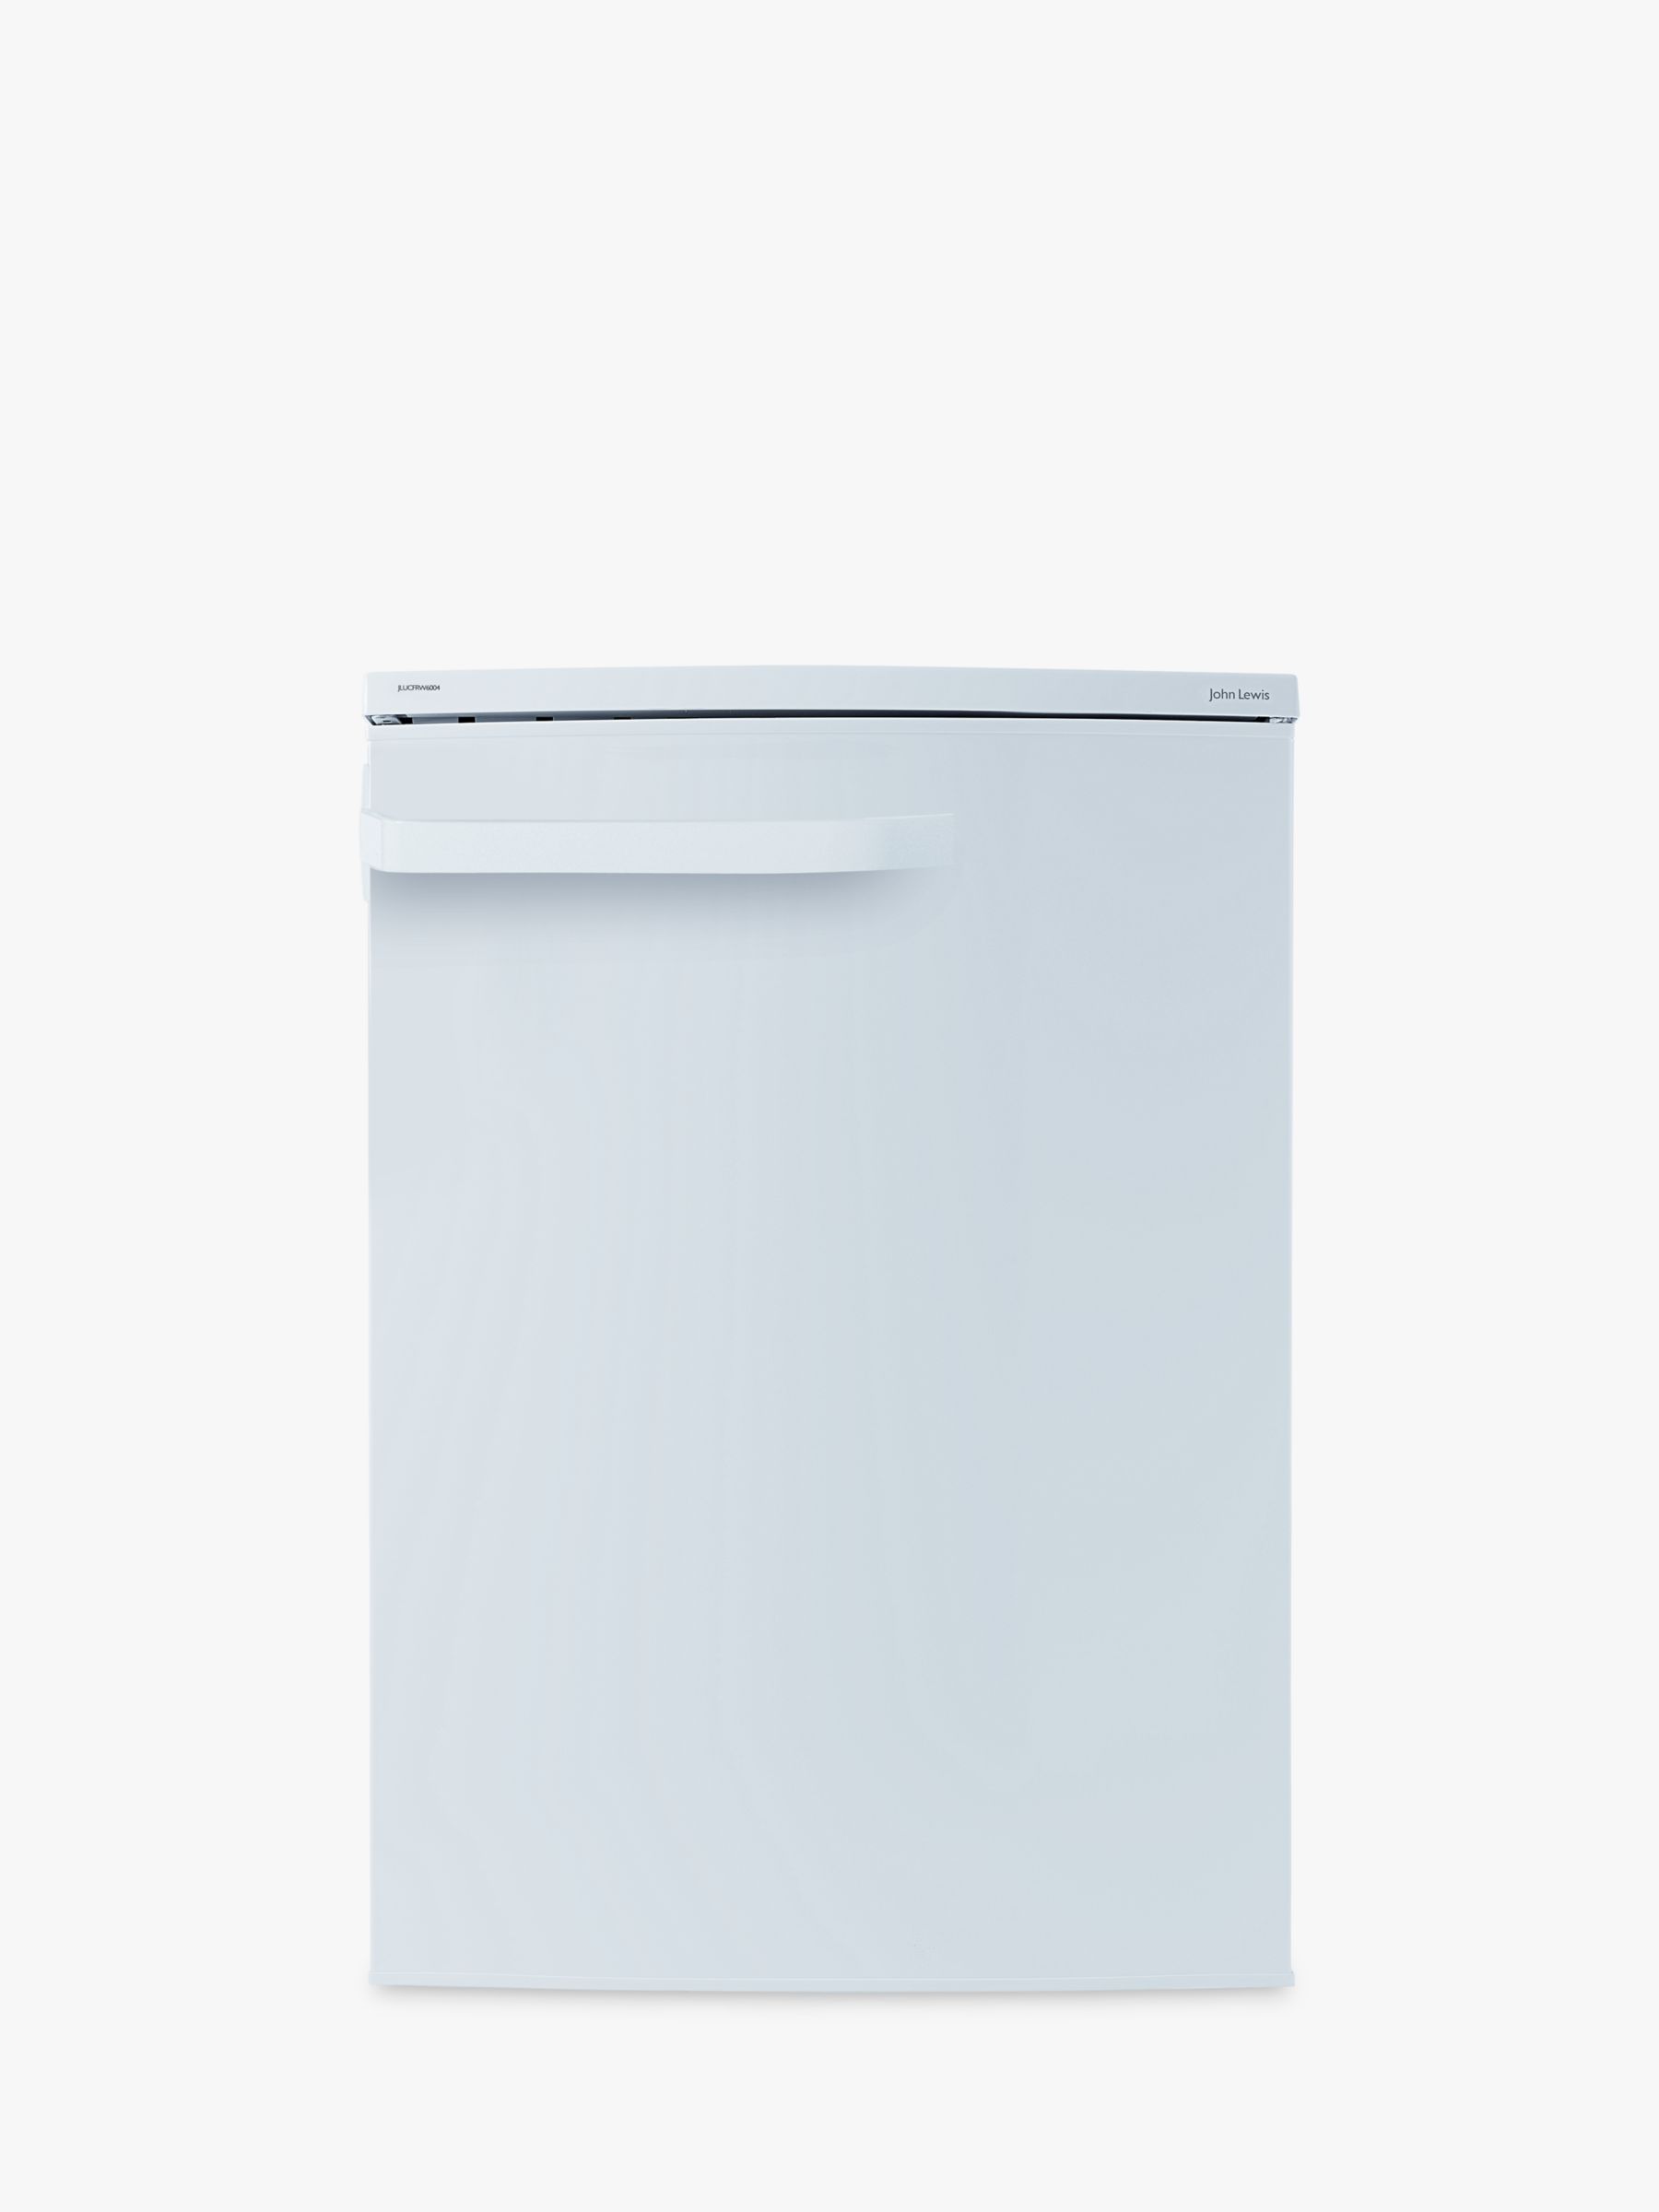 John Lewis & Partners JLUCFR6012 Undercounter Fridge with Freezer Compartment, A+ Energy Rating, 60cm Wide, White